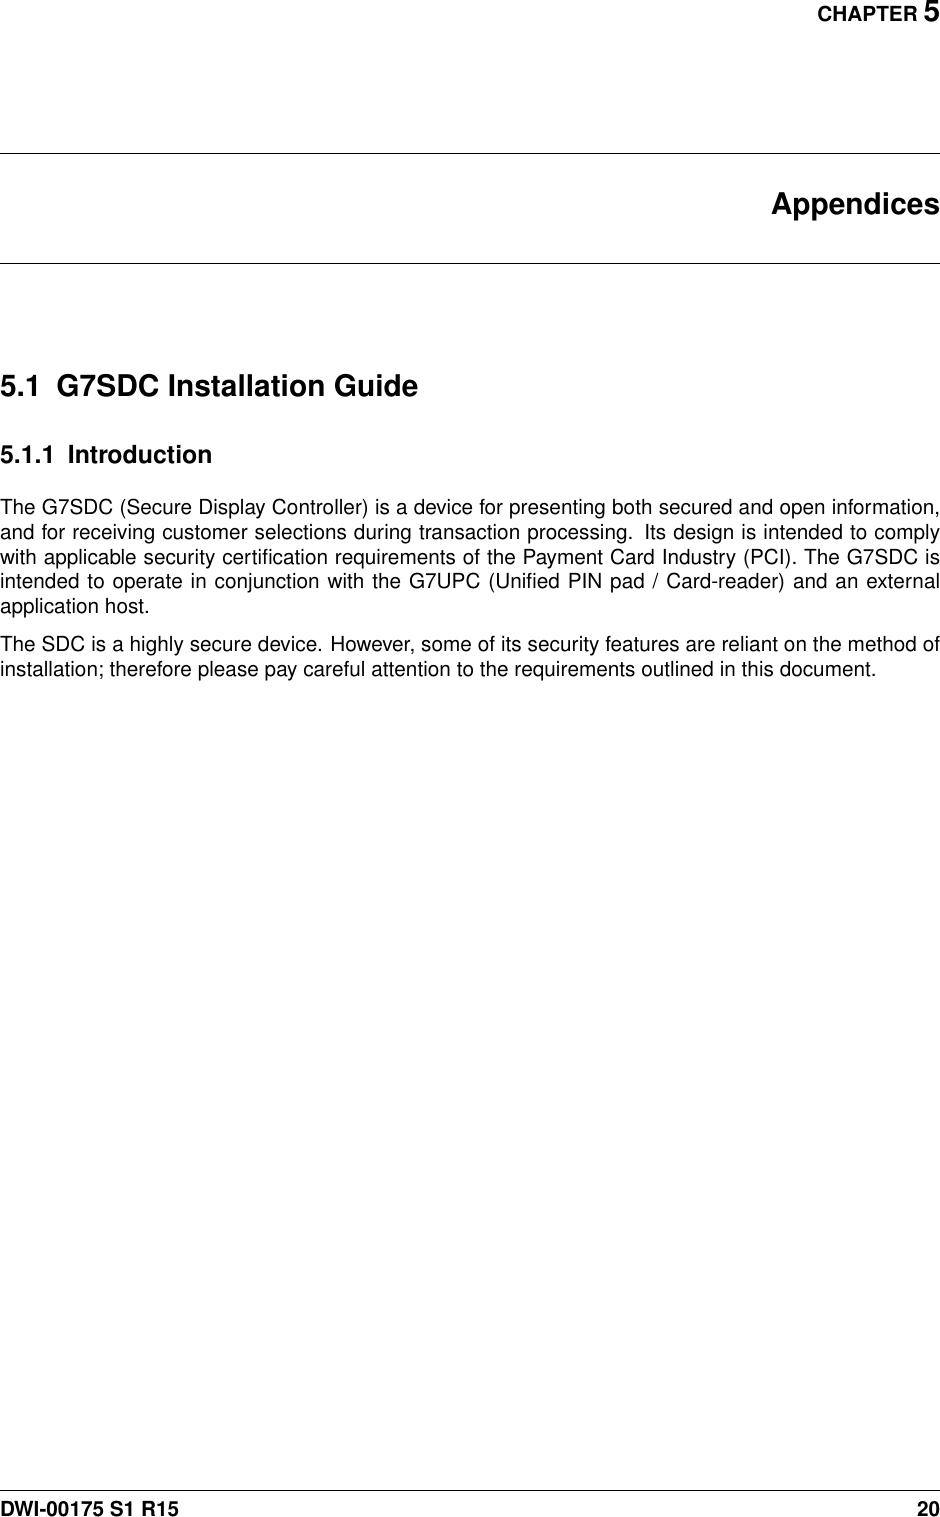 CHAPTER 5Appendices5.1 G7SDC Installation Guide5.1.1 IntroductionThe G7SDC (Secure Display Controller) is a device for presenting both secured and open information,and for receiving customer selections during transaction processing. Its design is intended to complywith applicable security certiﬁcation requirements of the Payment Card Industry (PCI). The G7SDC isintended to operate in conjunction with the G7UPC (Uniﬁed PIN pad / Card-reader) and an externalapplication host.The SDC is a highly secure device. However, some of its security features are reliant on the method ofinstallation; therefore please pay careful attention to the requirements outlined in this document.DWI-00175 S1 R15 20